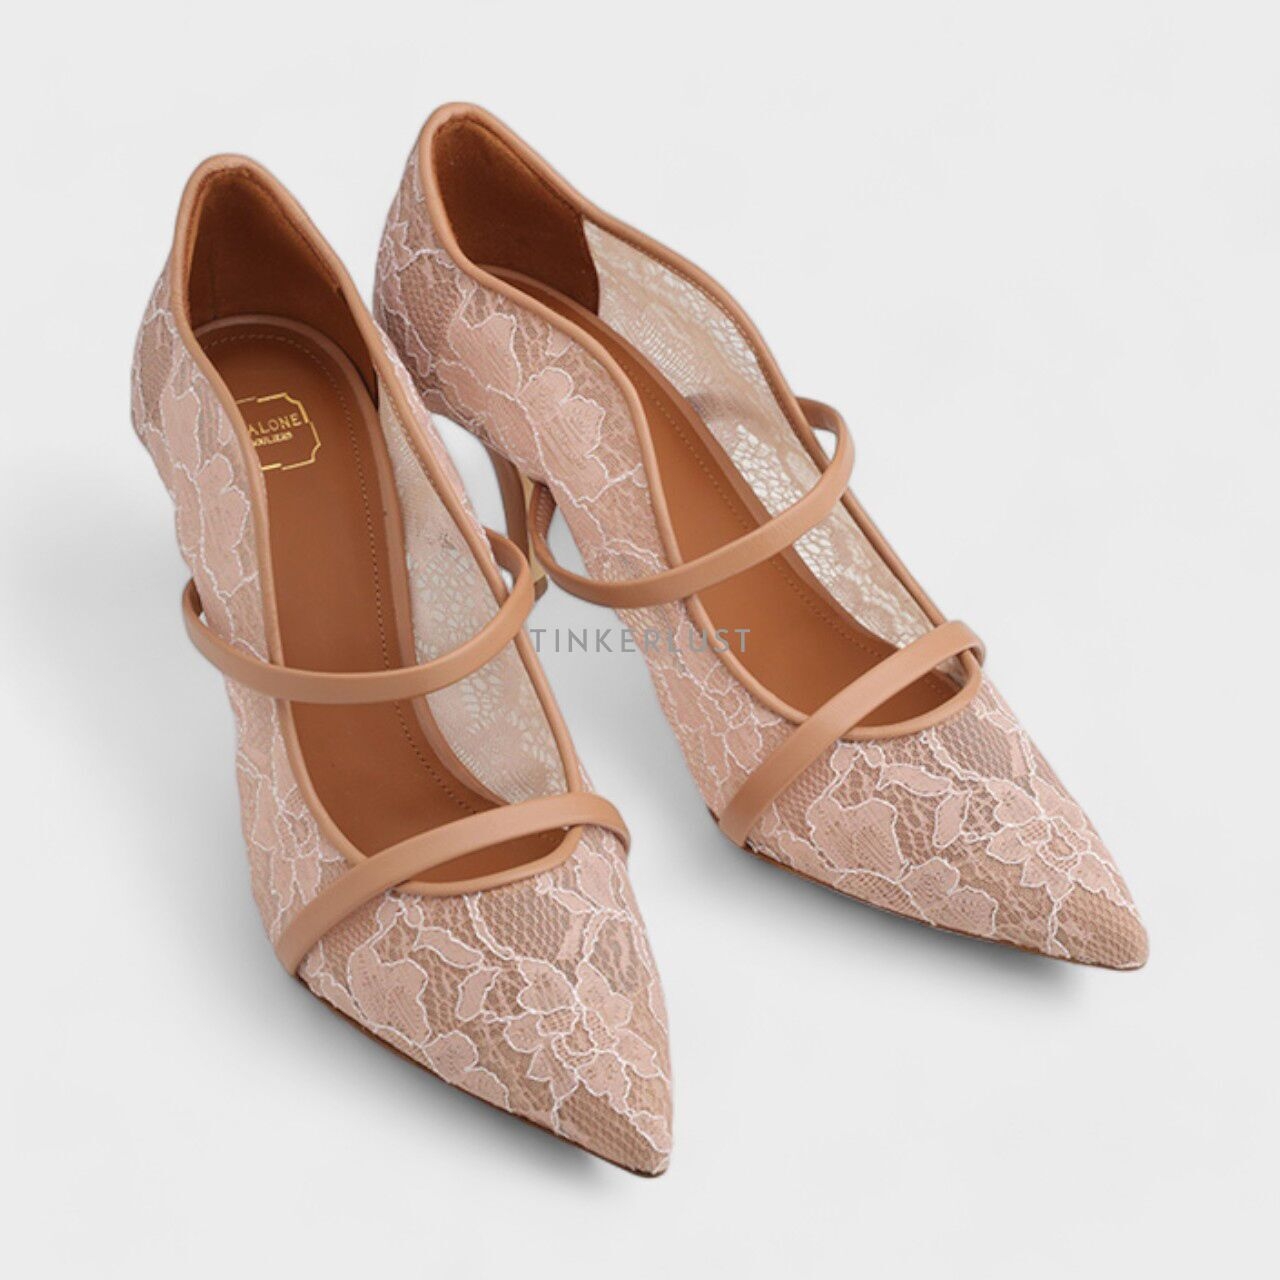 Malone Souliers Maureen Lace Heeled Pumps 70mm in Mauve/Nude Heels